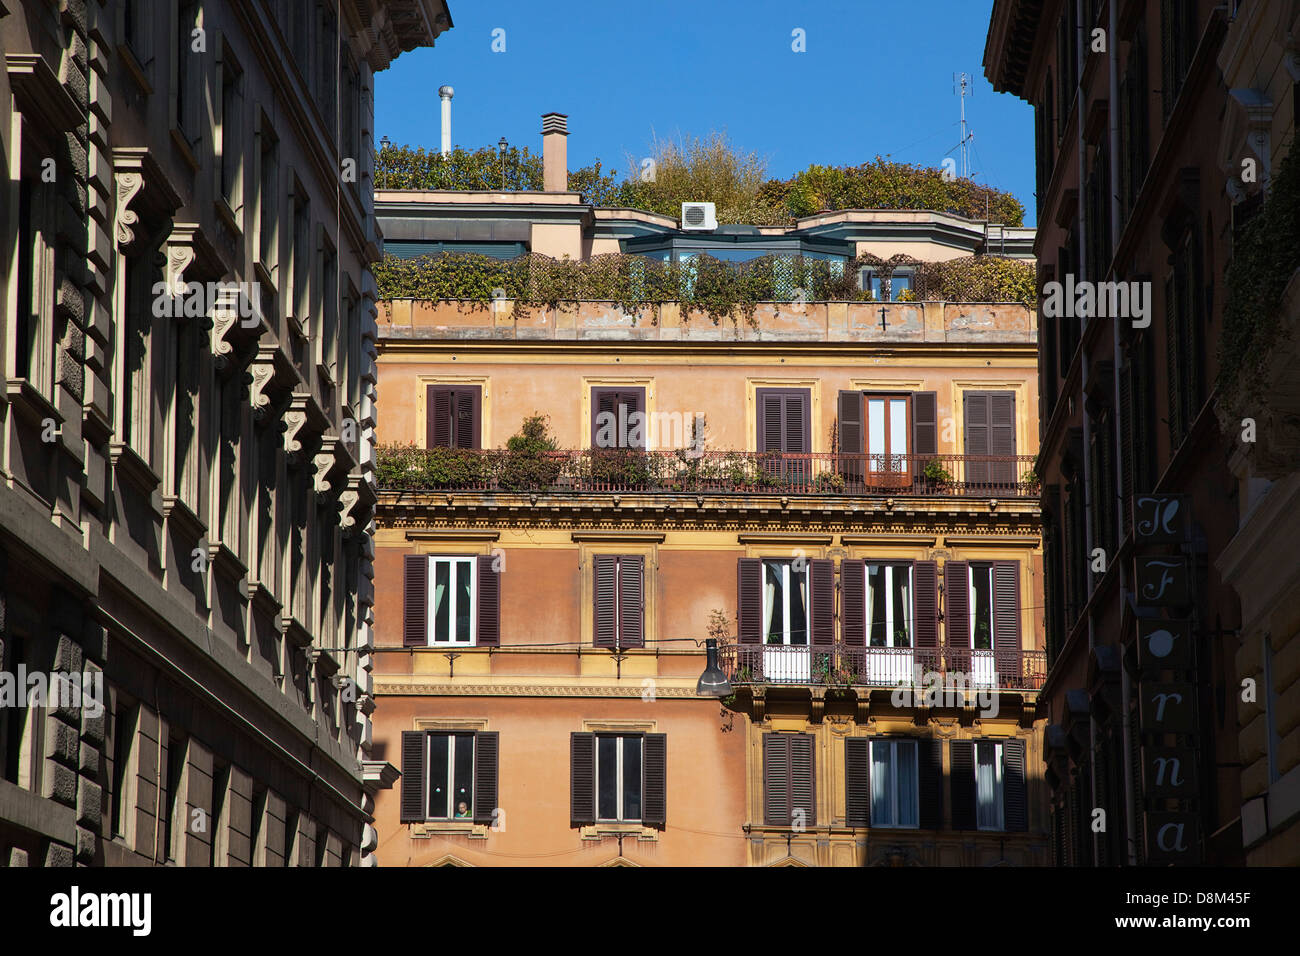 Italy, Lazio, Rome, typical architecture with shuttered windows. Stock Photo